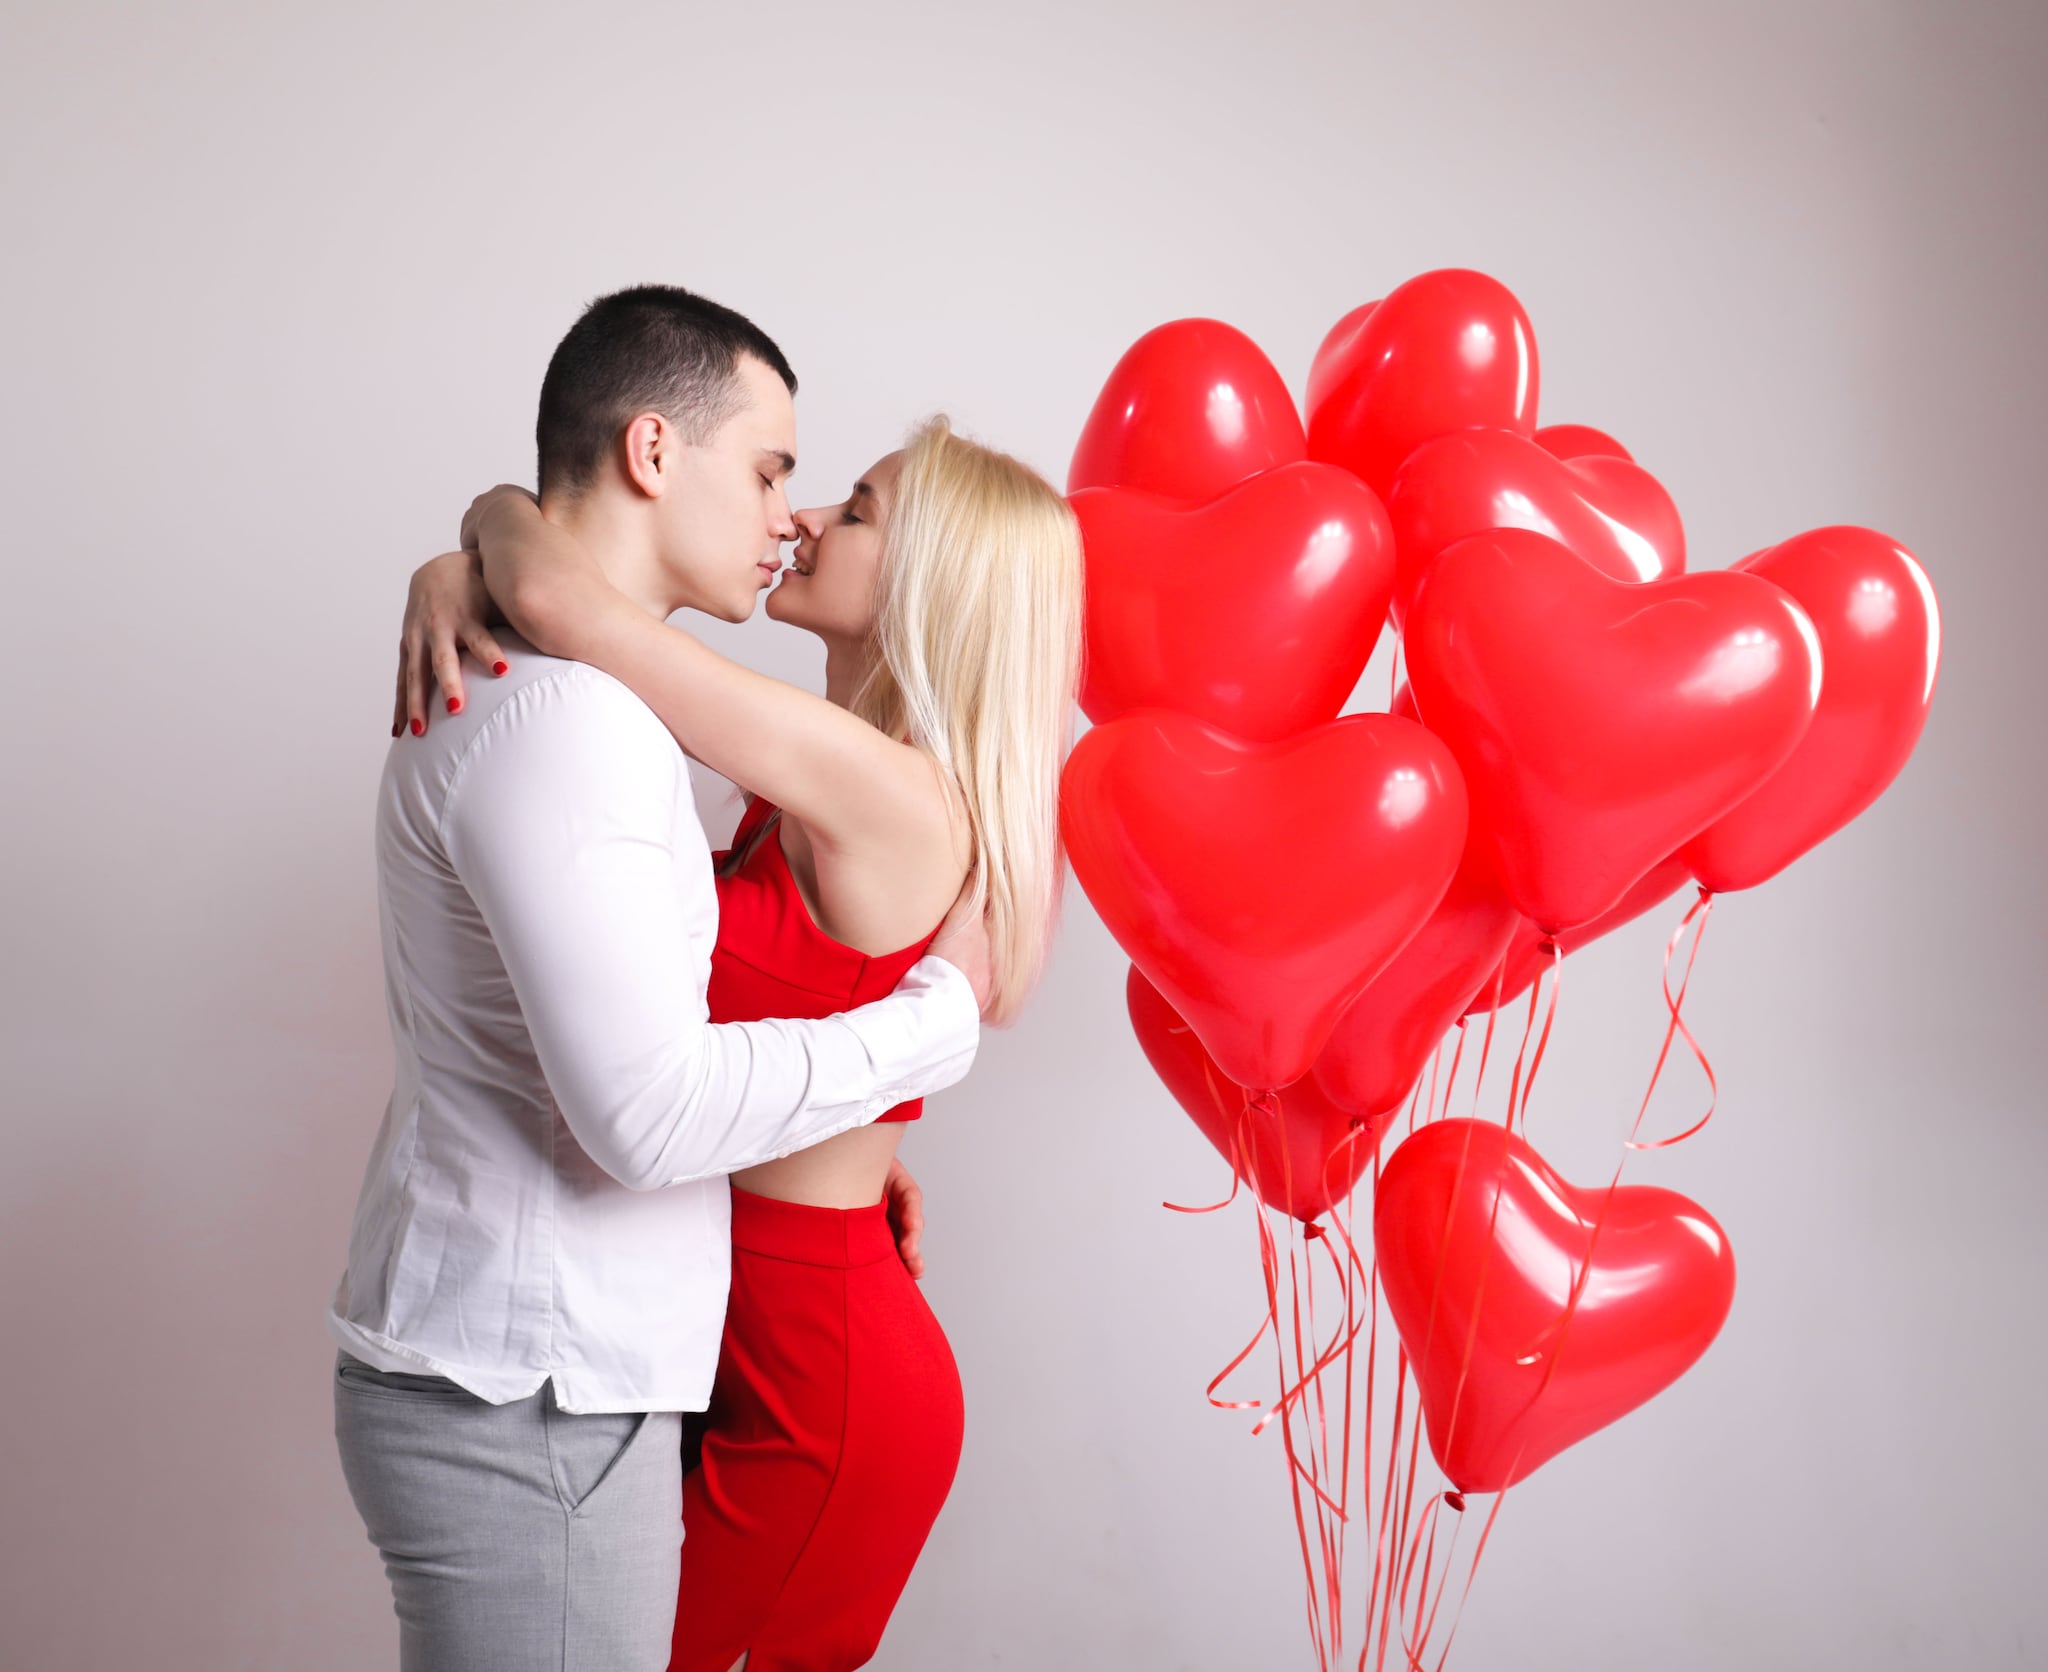 Happy Kiss Day 2023: Top 50 Wishes, Messages, Quotes and Images for your  special someone - Times of India